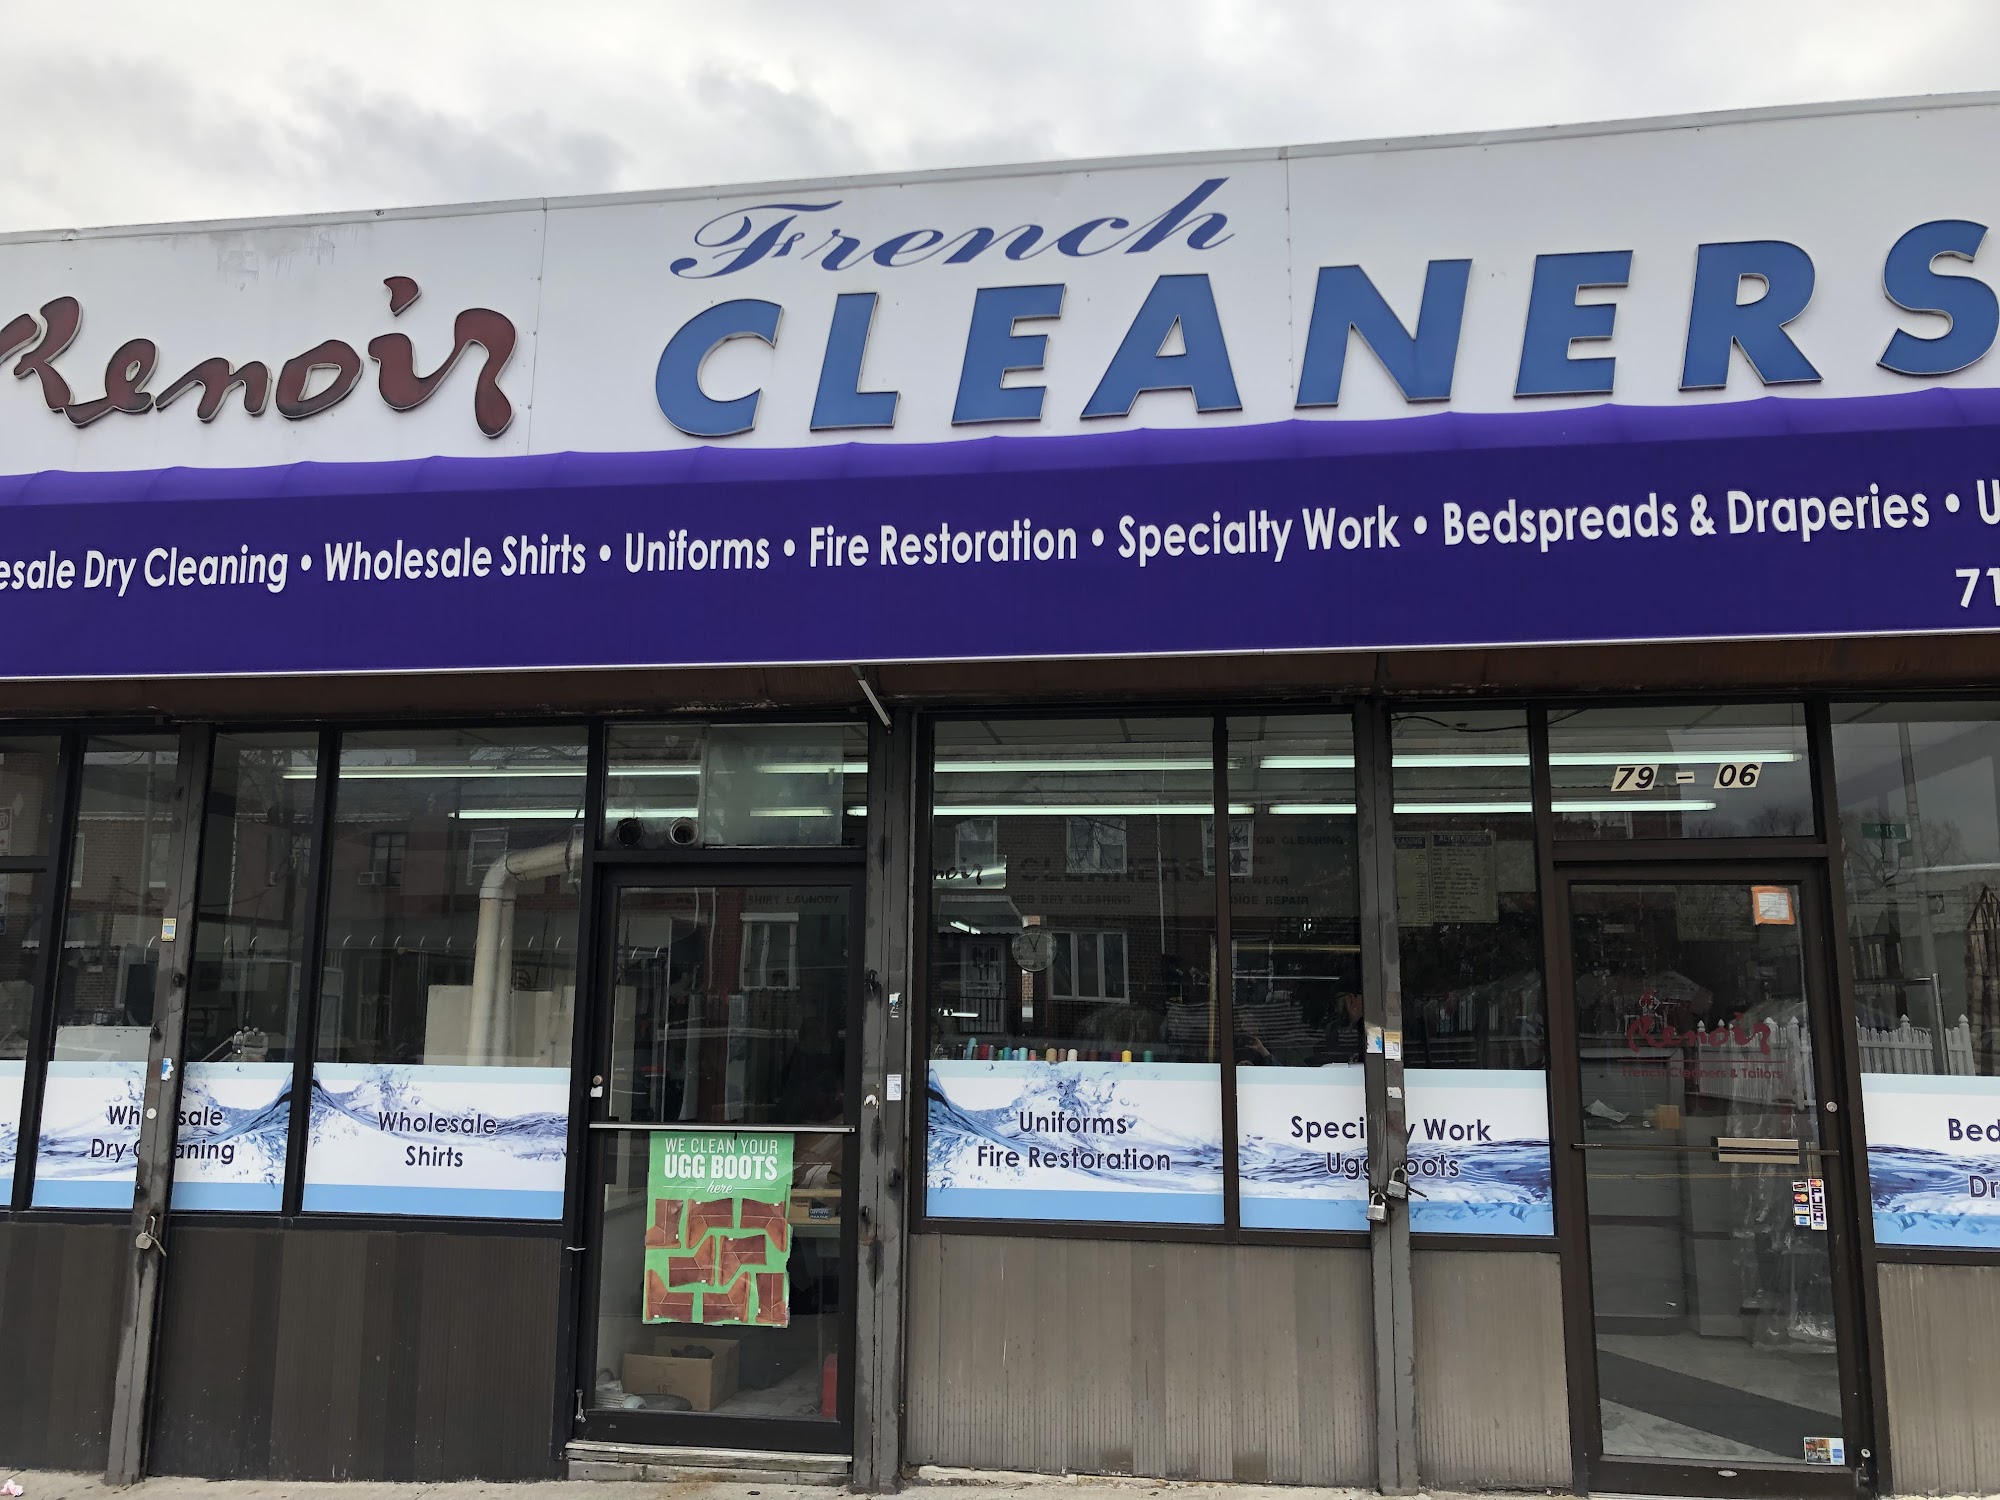 Renoir French Cleaners & Tailors